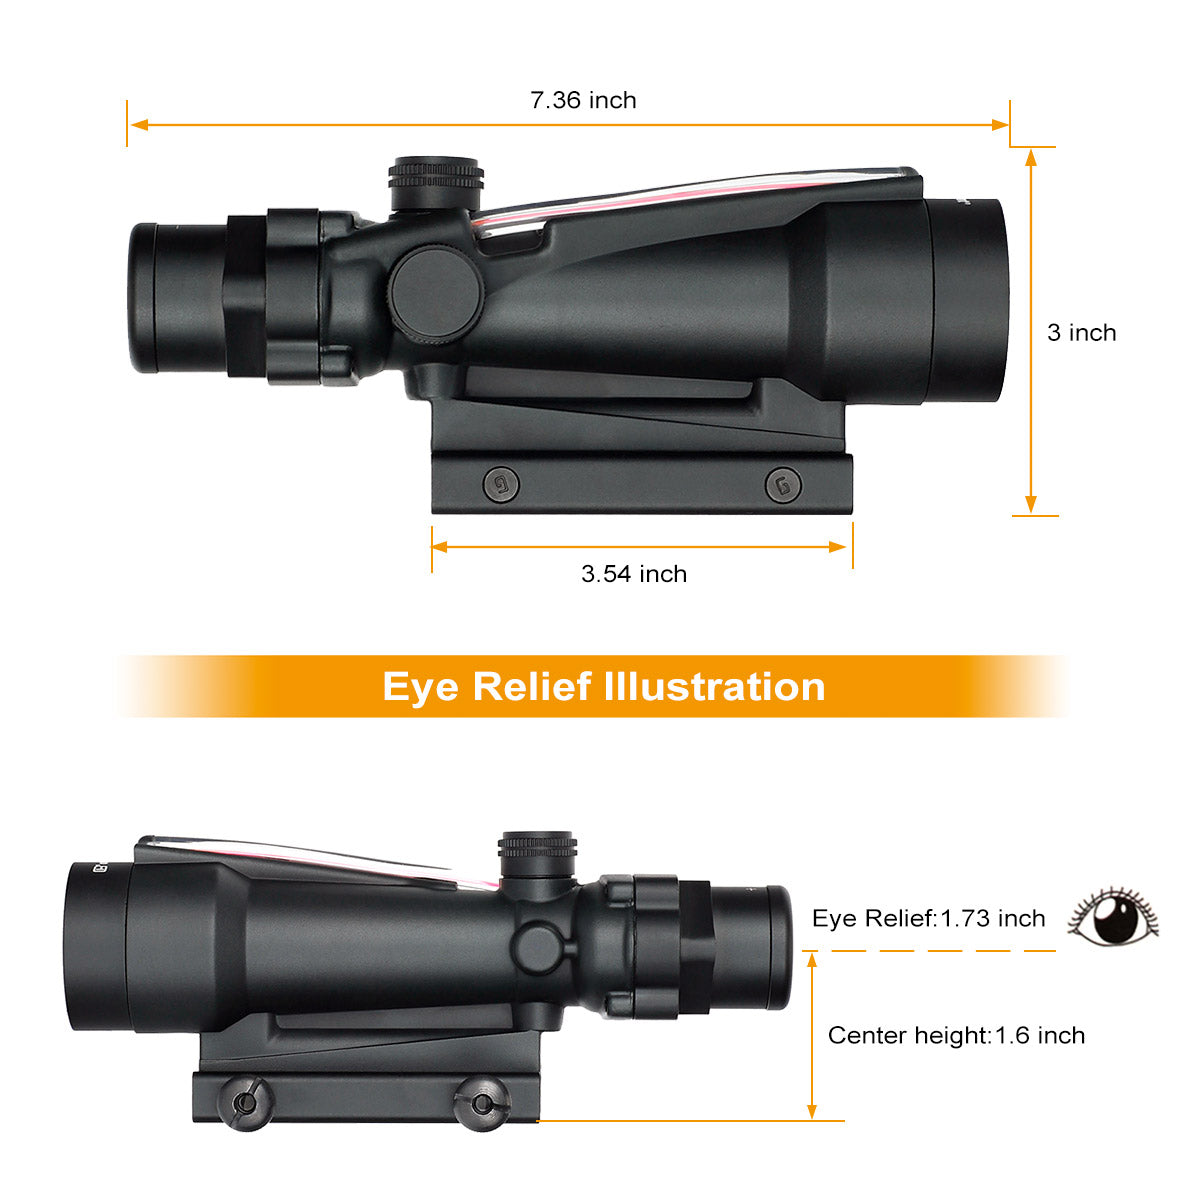 New!ohhunt® Tactical 5x35 Real Fiber Optics Rifle Scope with Sunshades Diopter Adjustment